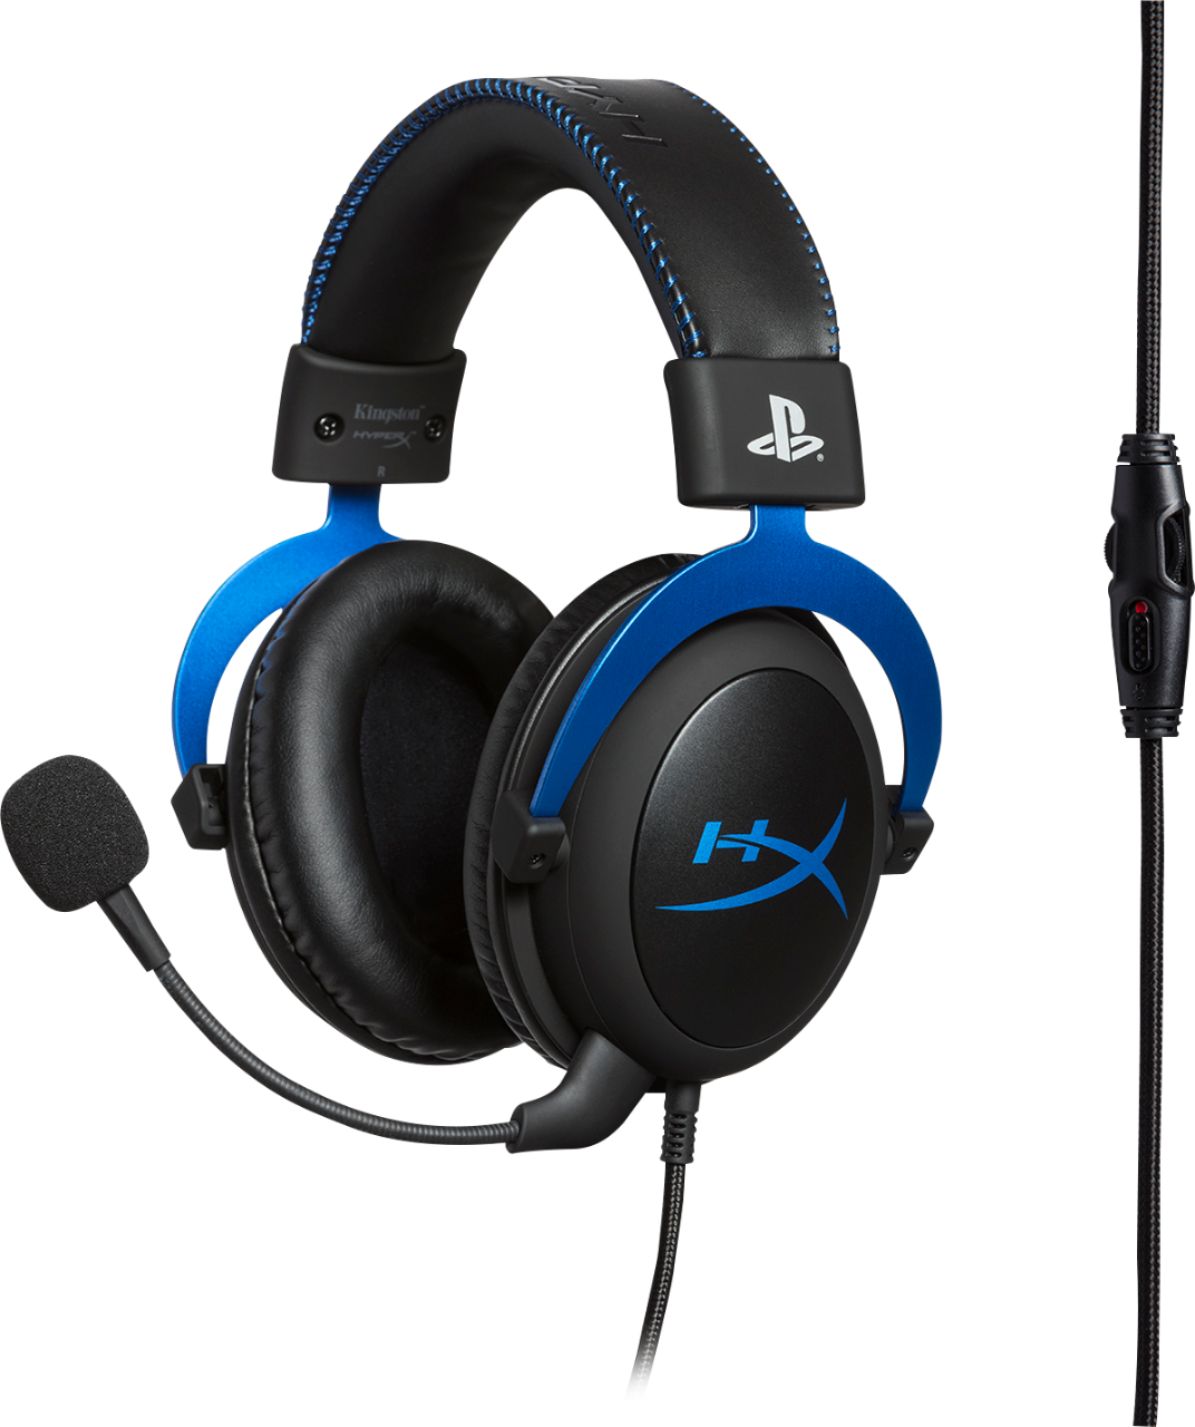 ps4 headset mic not working